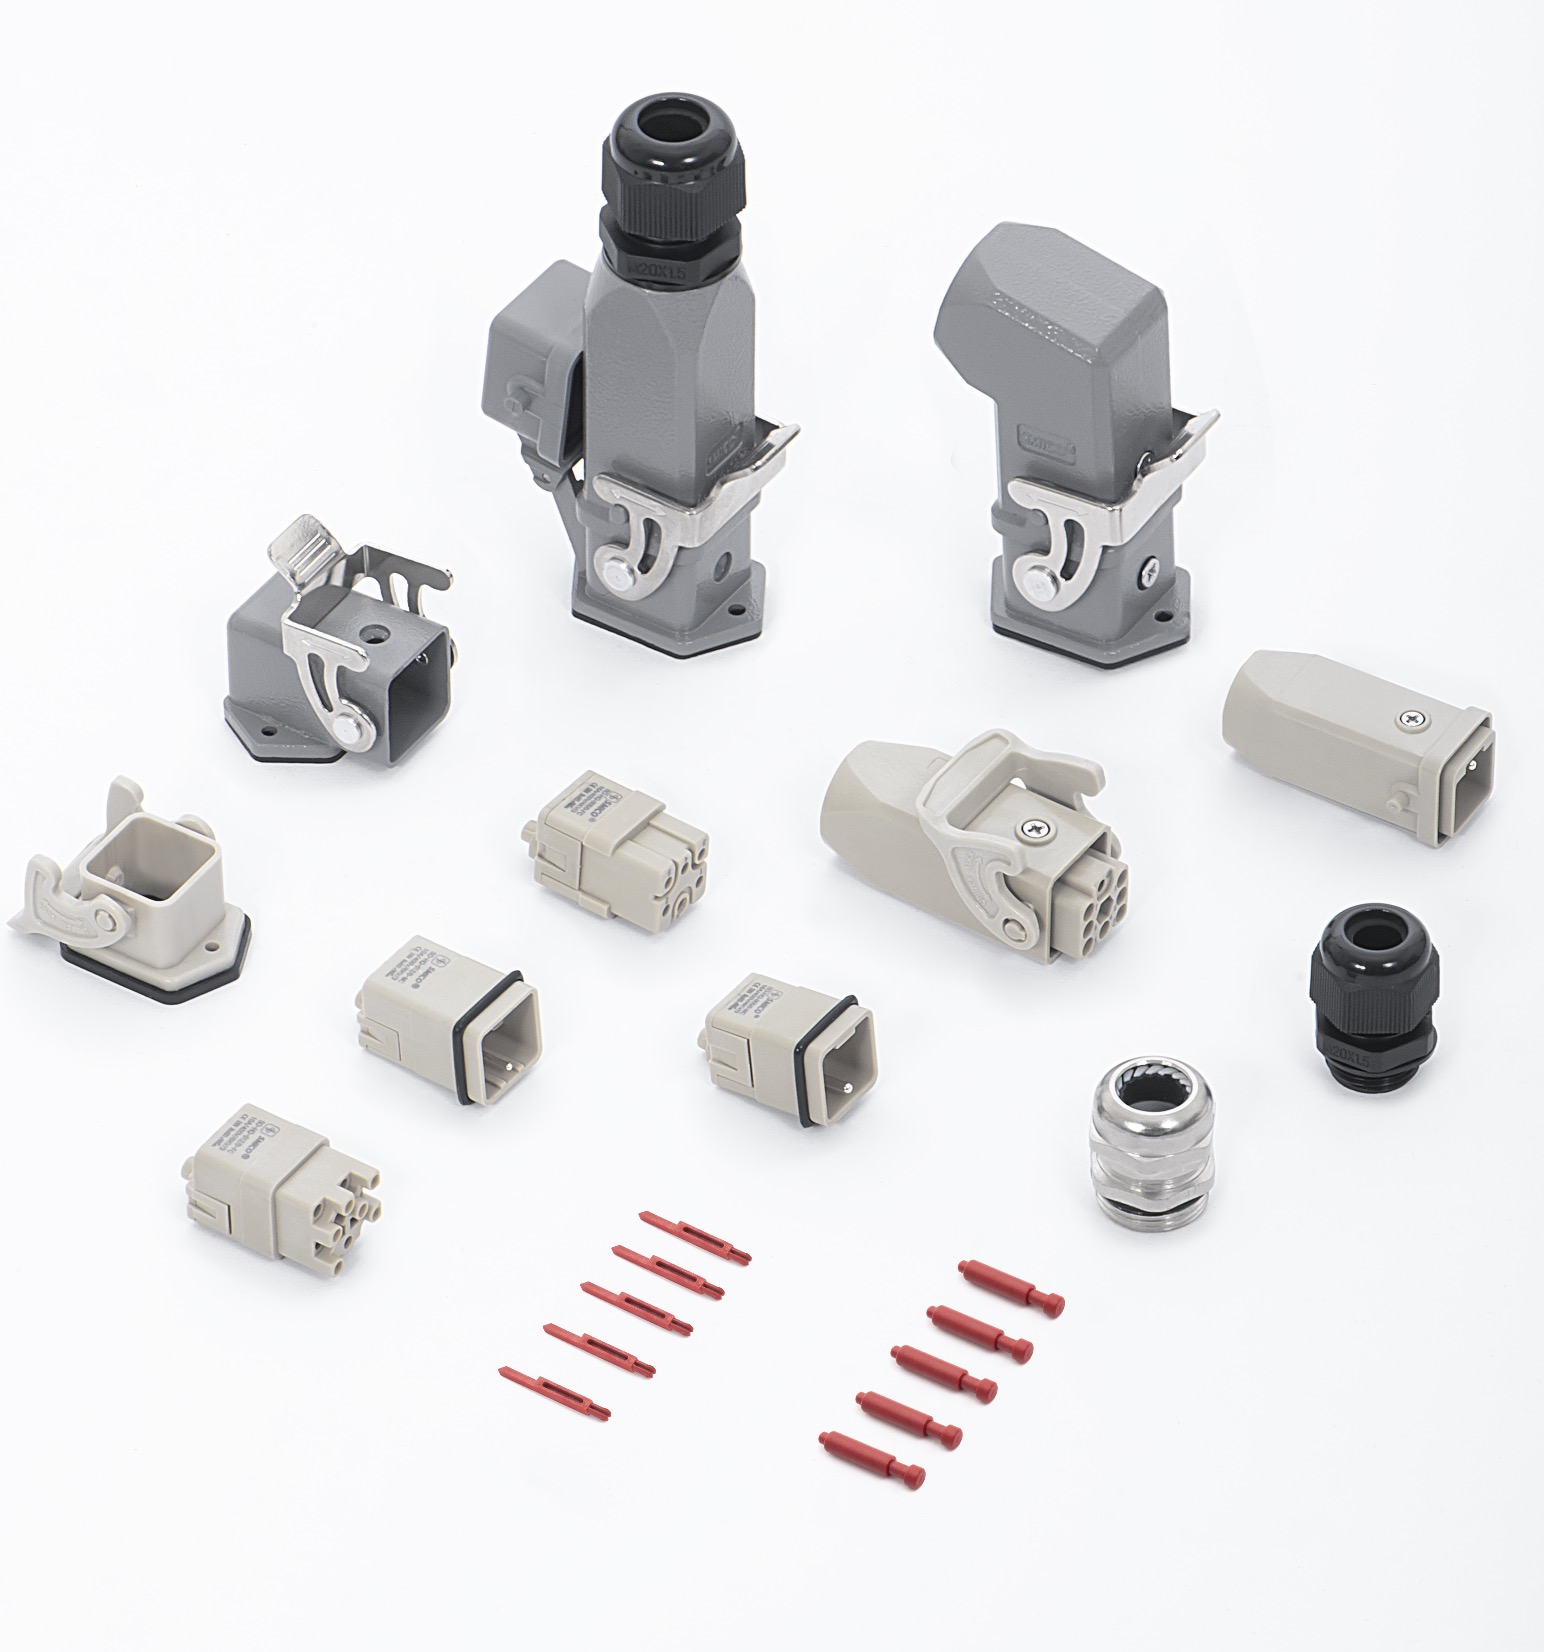 Reliable connection丨Heavy-duty connectors are widely used in industrial automation